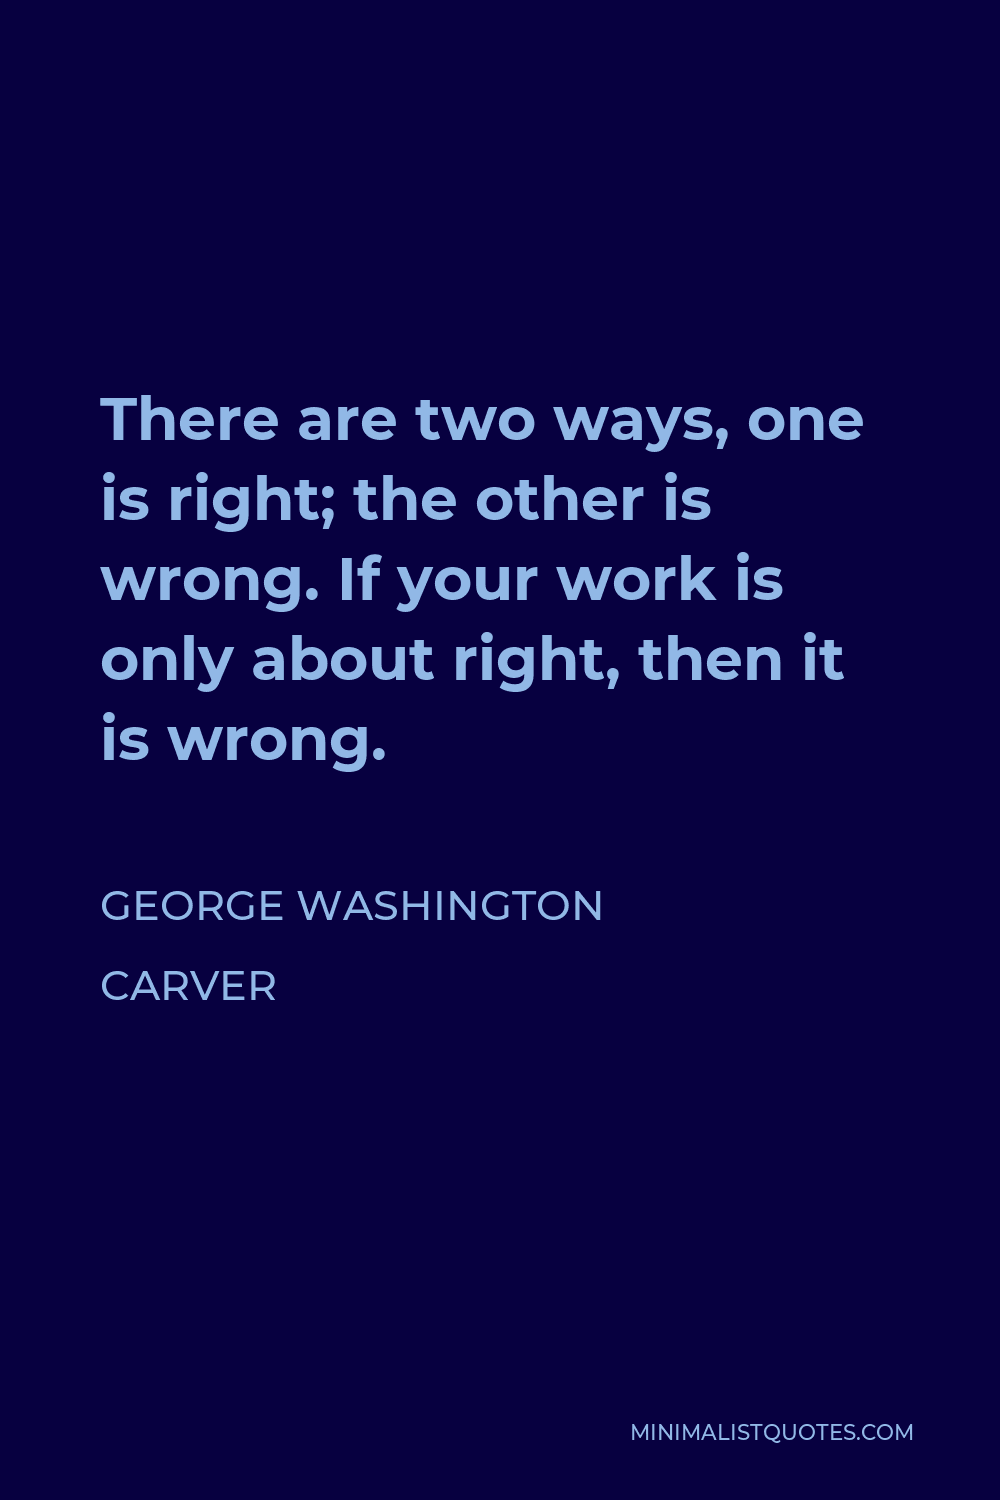 George Washington Carver Quote - There are two ways, one is right; the other is wrong. If your work is only about right, then it is wrong.